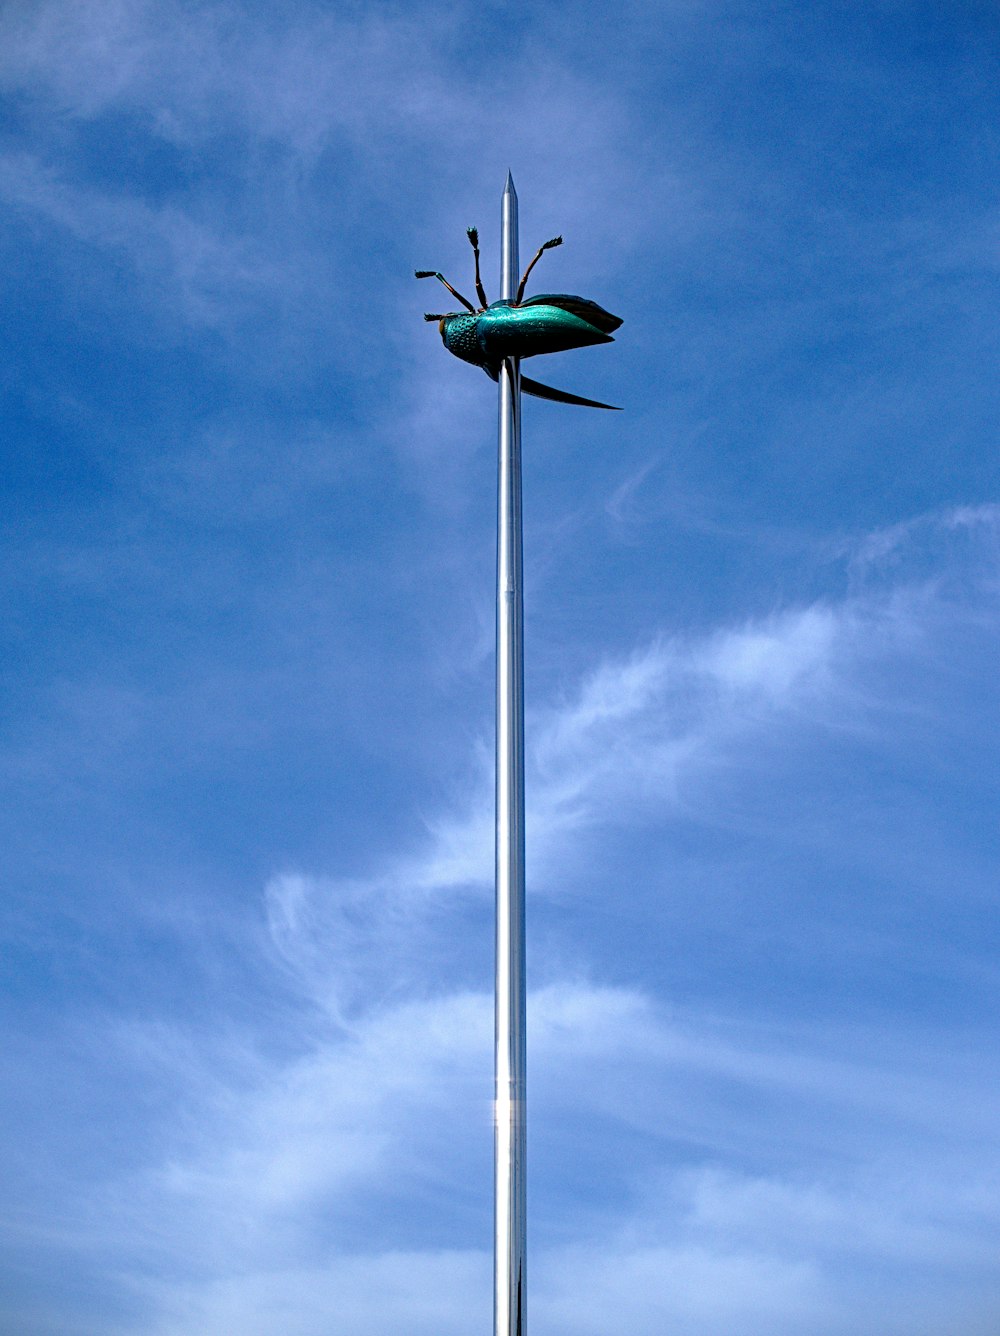 green bird on gray metal pole under blue sky during daytime